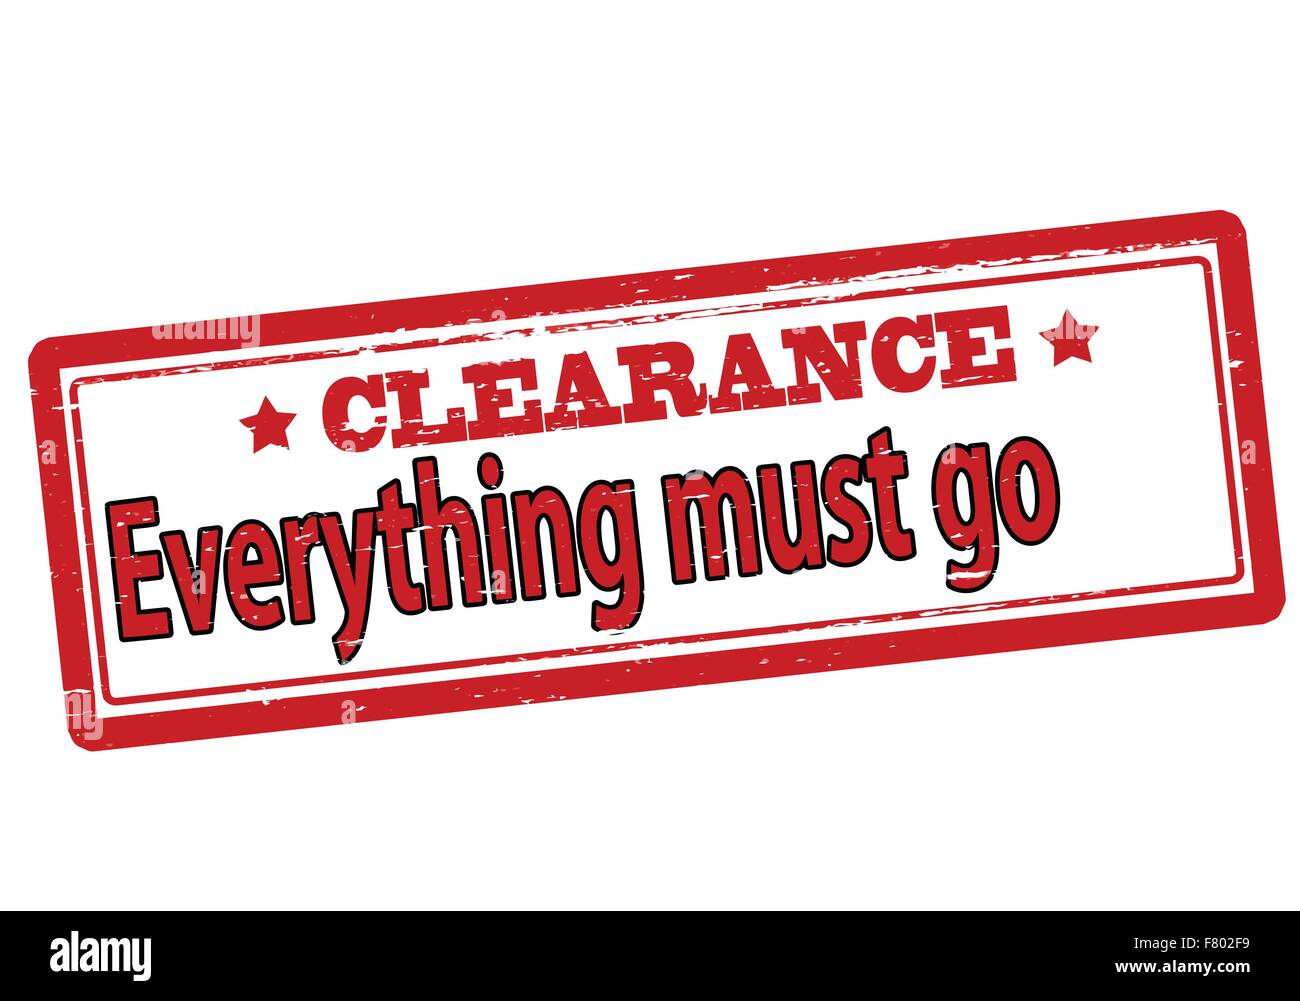 Clearance everything must go Stock Vector